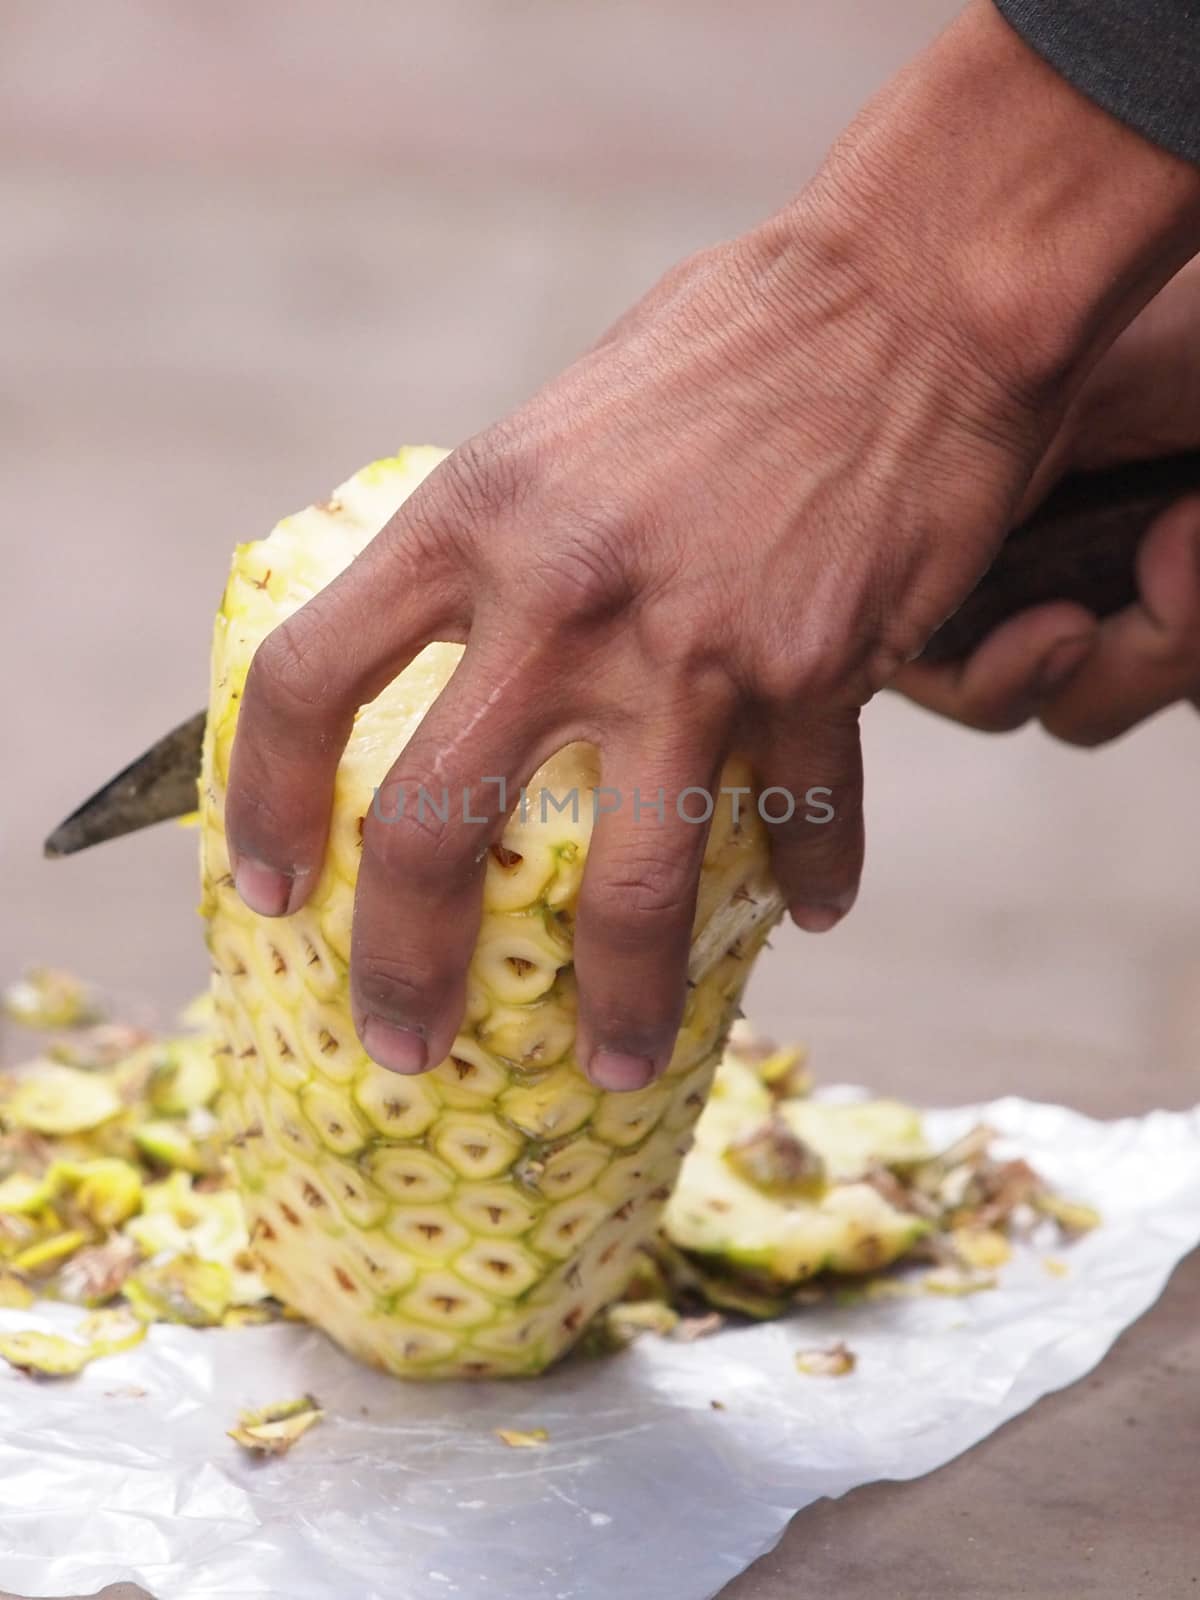 Cropped view of an Asian woman slicing a pineapple with a knife      